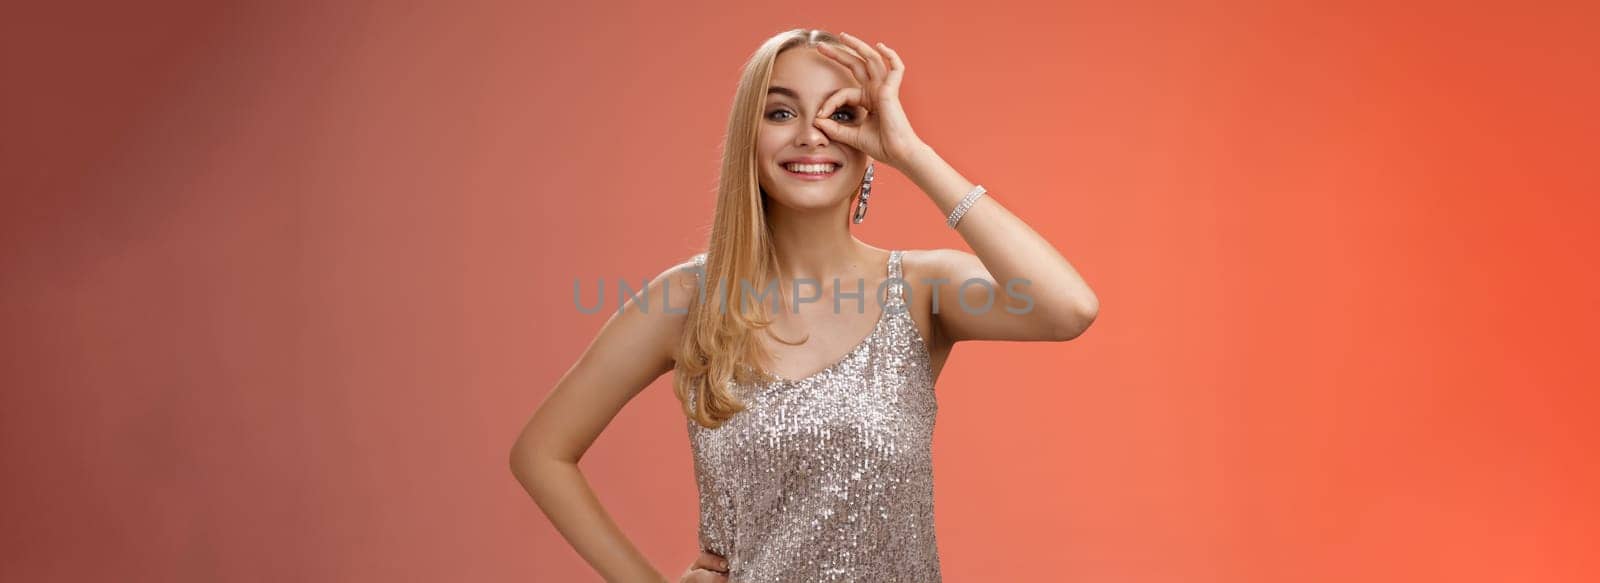 Charming elegant blond european carefree woman in silver glittering evening dress show no problem okay sign look through eye smiling delighted check out awesome promo intrigued, red background.